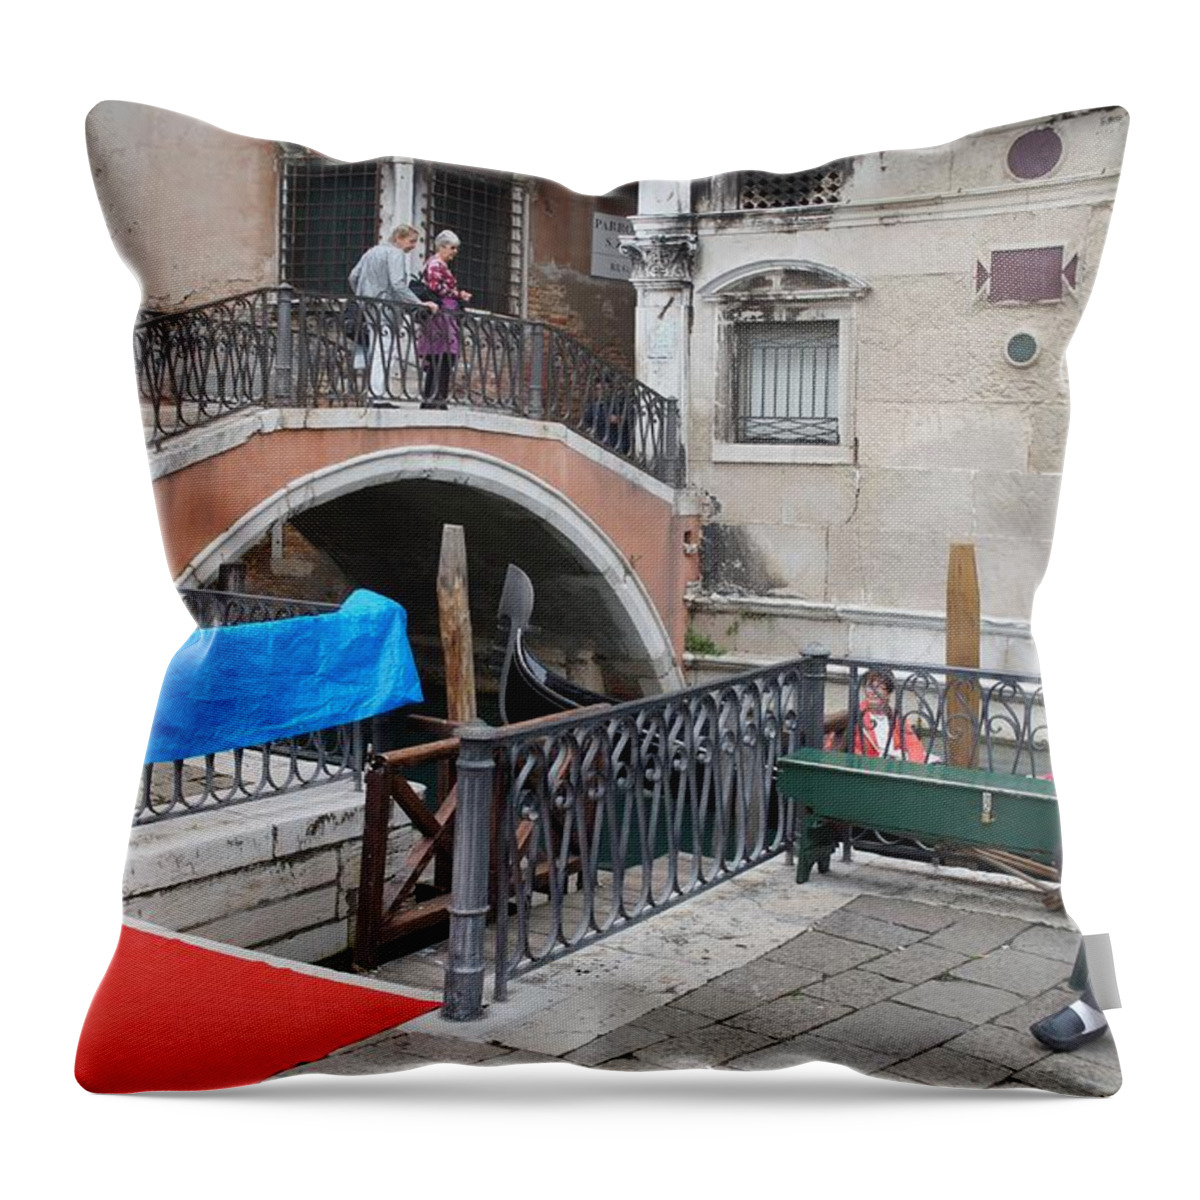 Gondolier Throw Pillow featuring the photograph Gondolier by Kristine Bogdanovich